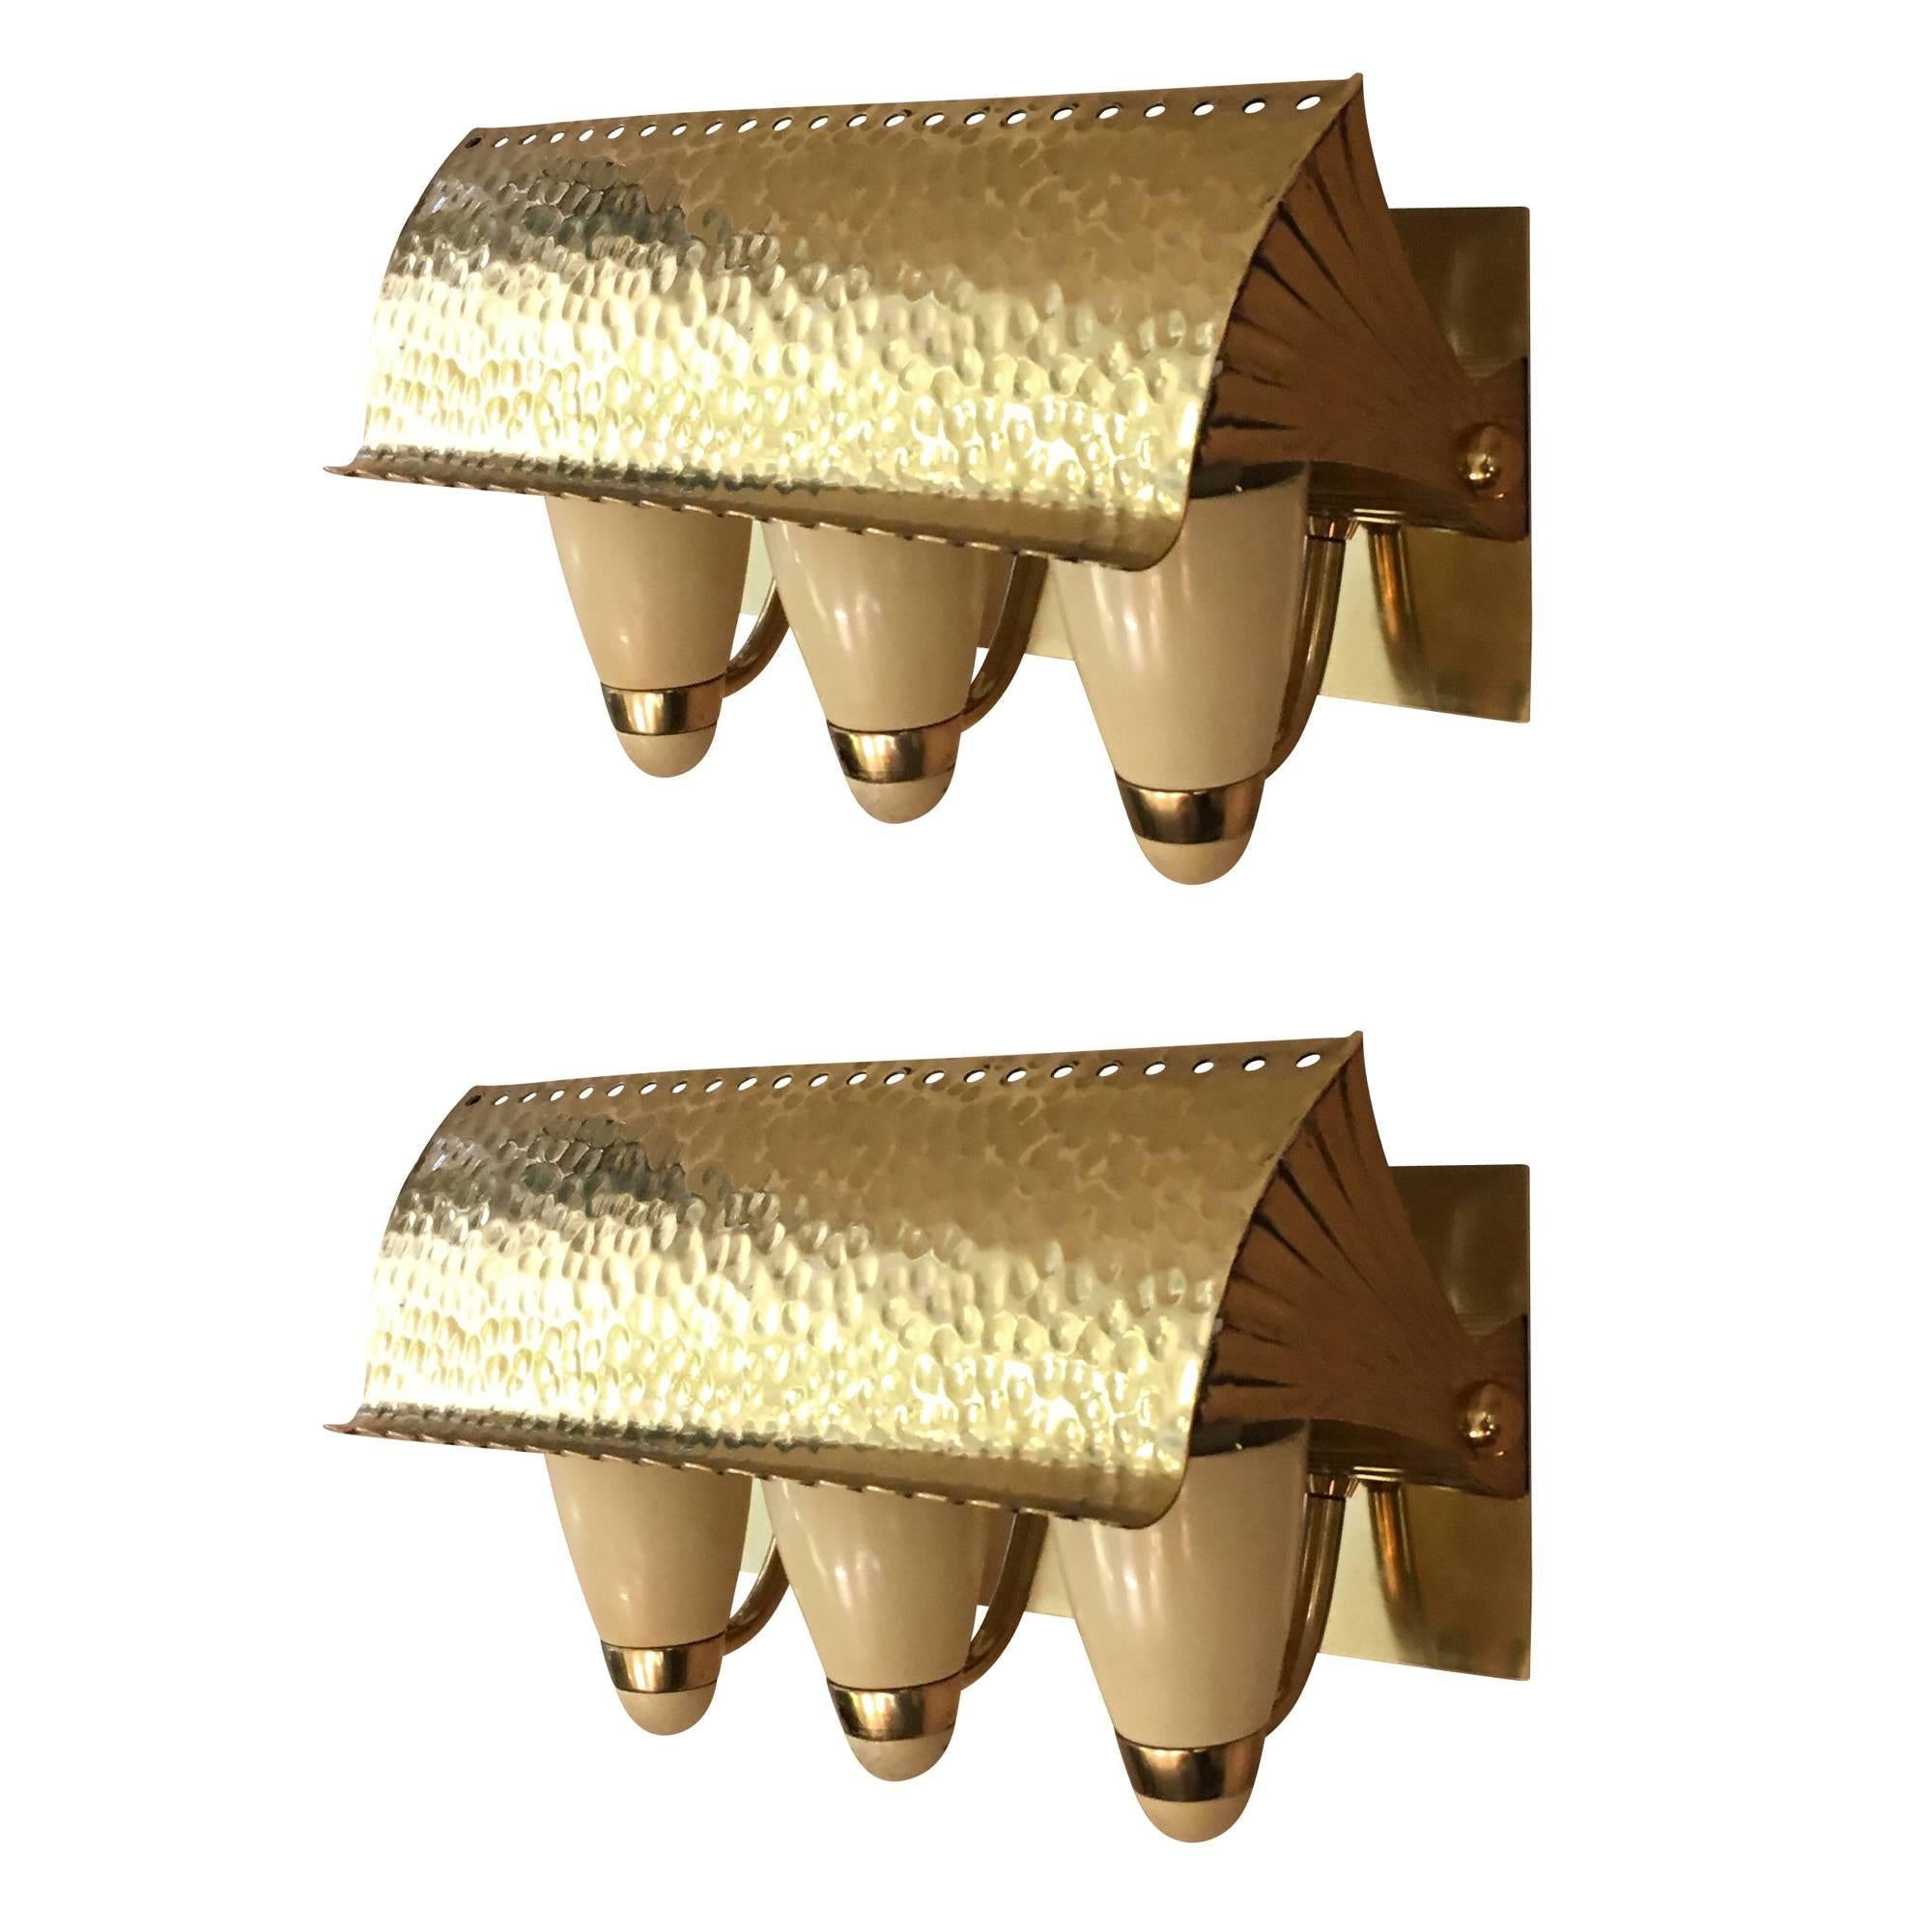 Elegant pair of Italian Mid-Century brass sconces featuring three off-white cones that hold the light bulbs and an adjustable hammered shade.
